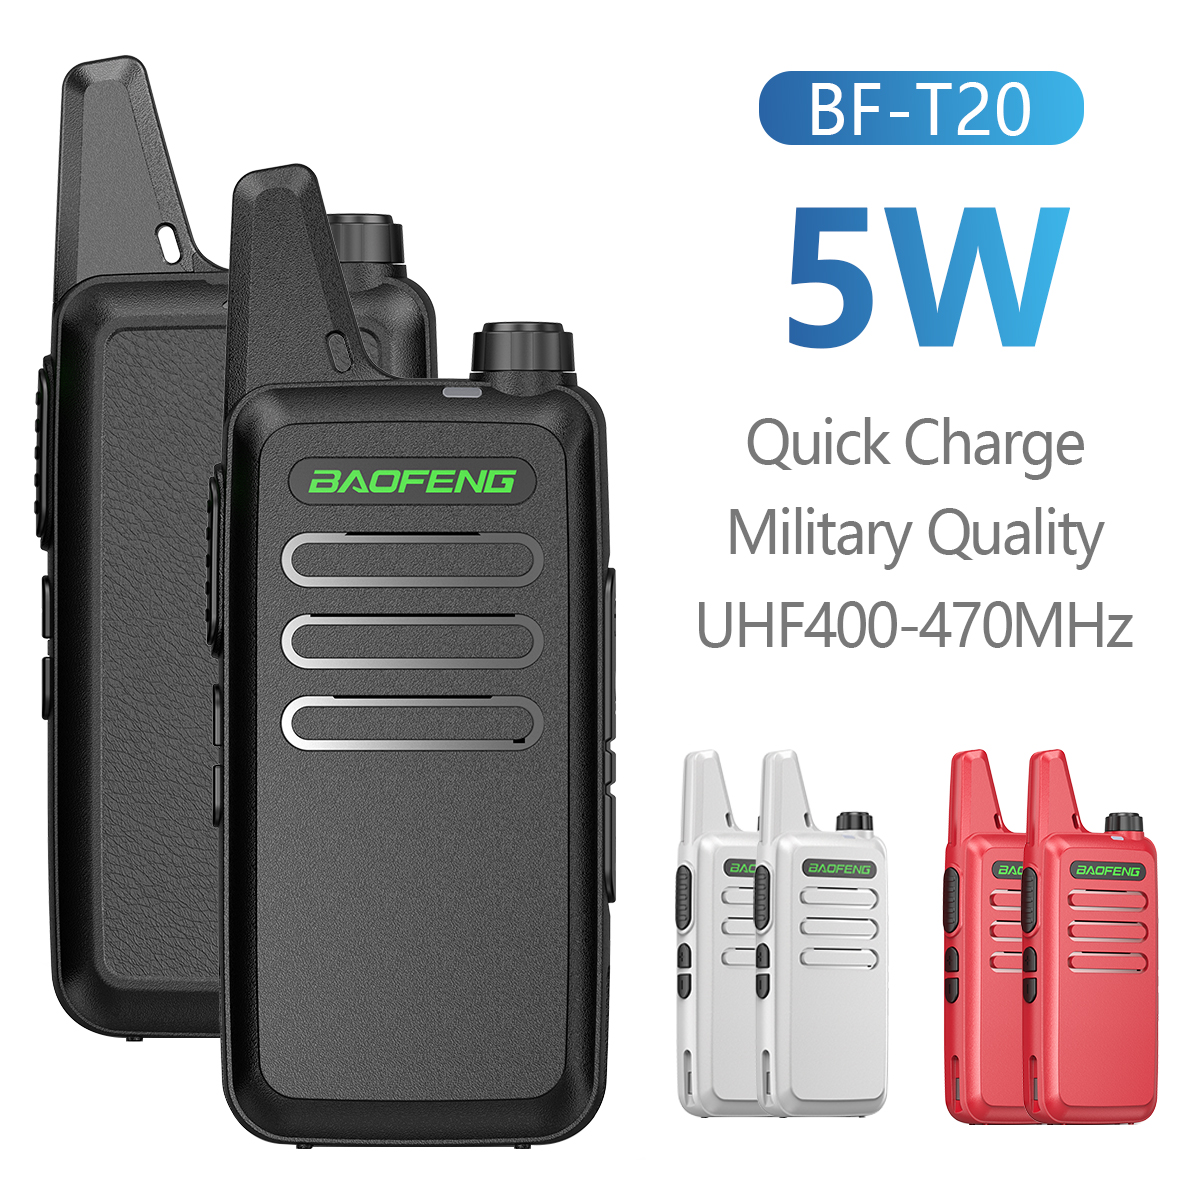 Buy take 1】Baofeng BF-T20 5W 16 Channel UHF 400-470MHz Two-Way Black Walkie  Talkie Support USB Charging For BF-C9 KD-C1 BF-888S Radio Support COD For  Child Chrismas Present Lazada PH